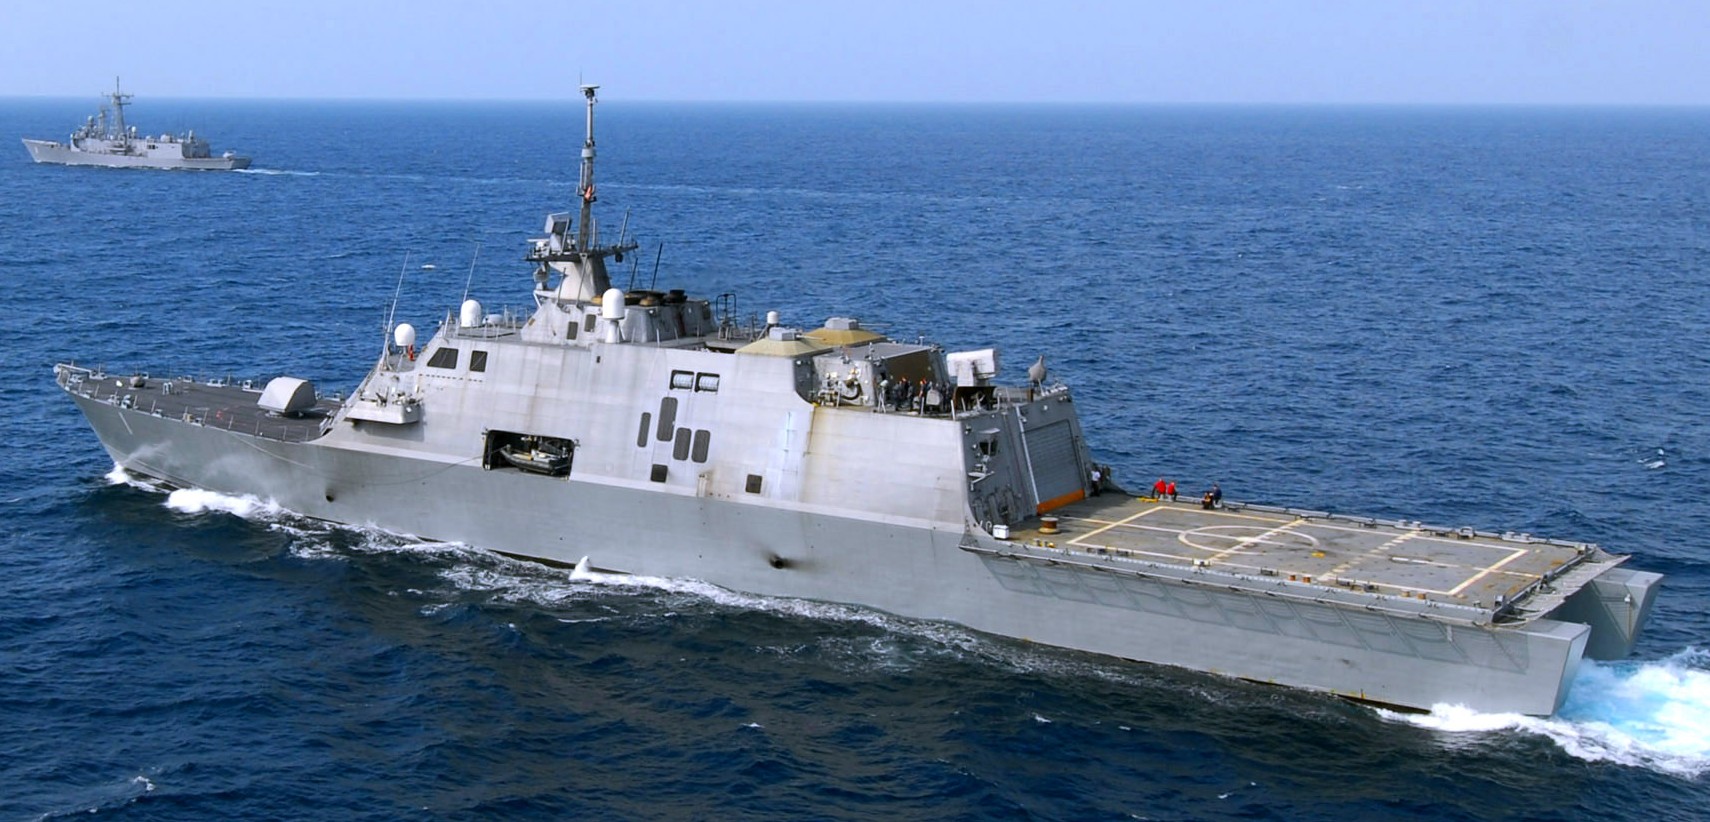 lcs-1 uss freedom class littoral combat ship us navy 90